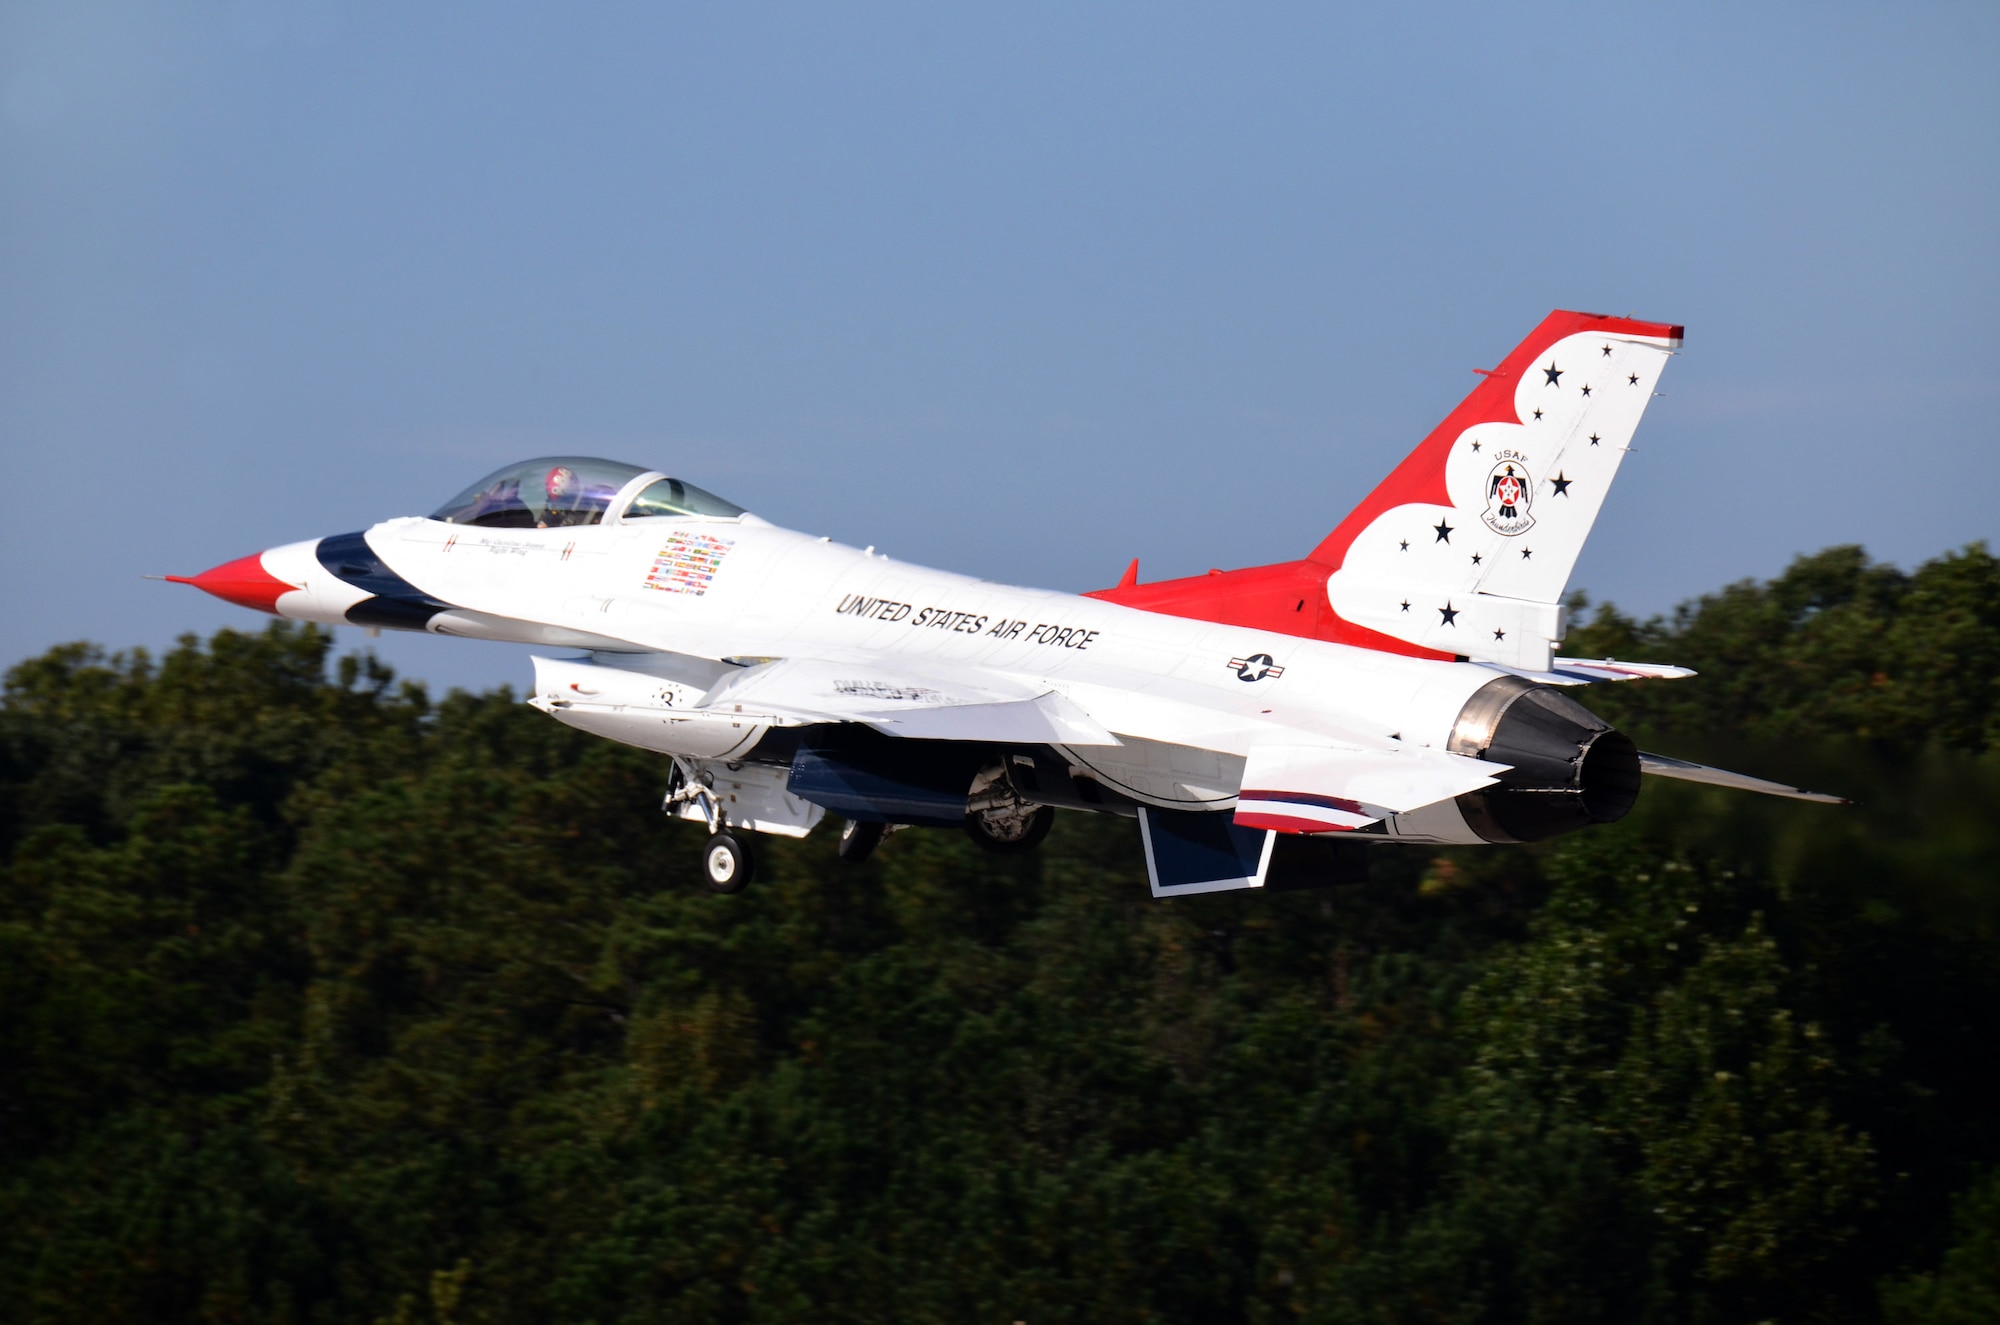 Thunderbird #3, Maj. Caroline Jensen, flying right wing in the diamond formation, departs Dobbins Air Reserve Base for the Wings Over North Georgia air show Oct. 18, 2014. The USAF Air Demonstration Squadron Thunderbirds are using Dobbins as their base of operations for their performances at the air show this weekend at the Russell Regional Airport in Rome, Georgia. (U.S. Air Force photo/ Brad Fallin/Released)